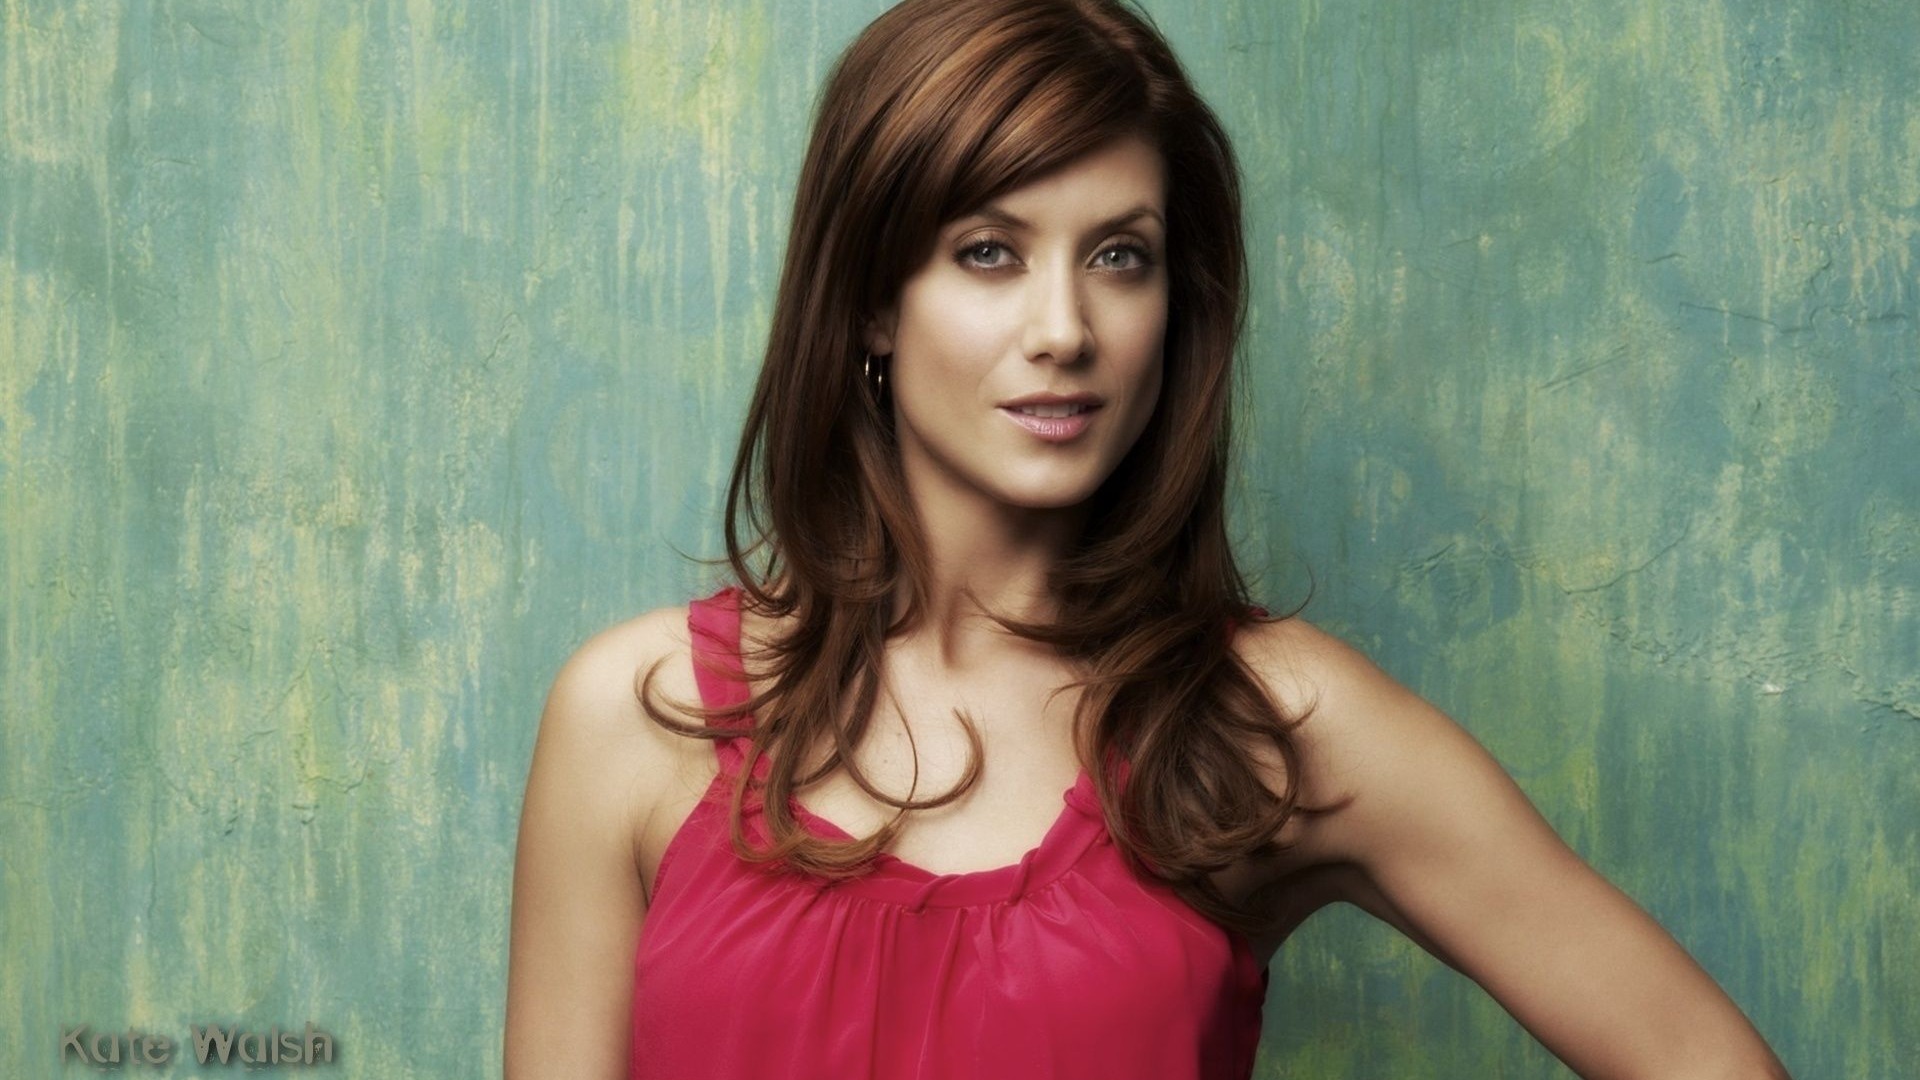 Kate Walsh #003 - 1920x1080 Wallpapers Pictures Photos Images